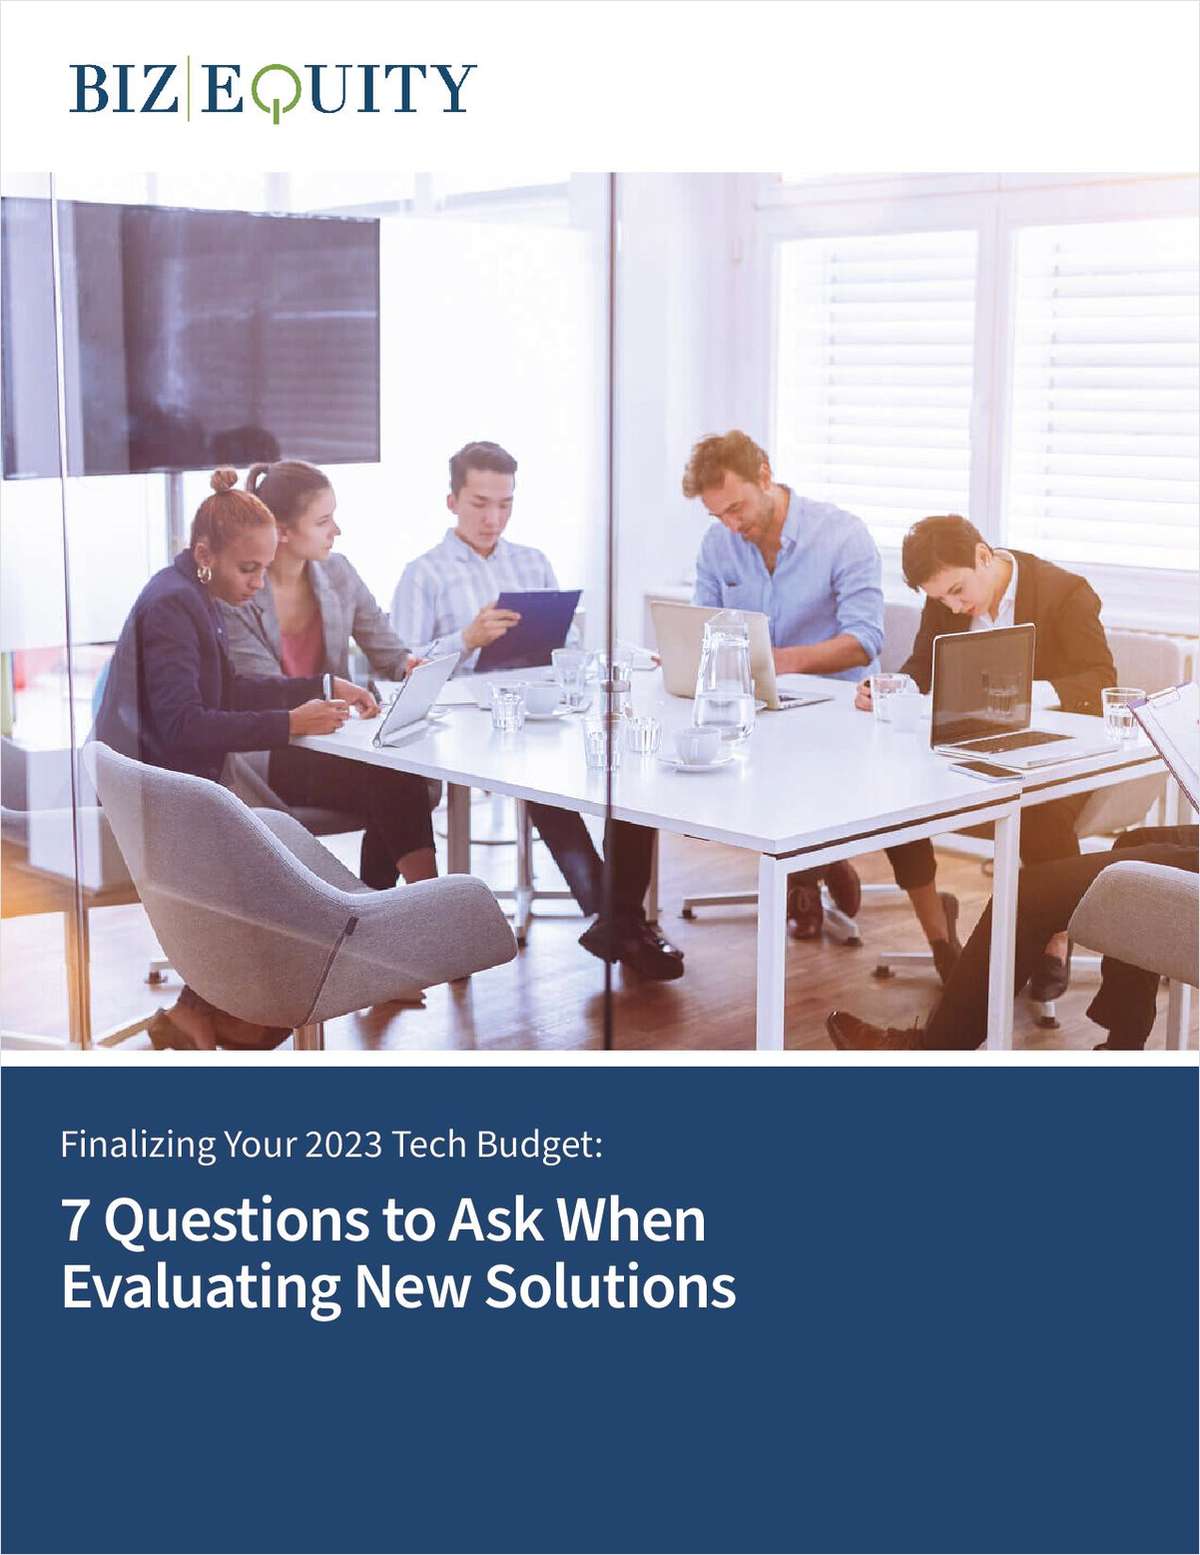 Finalizing Your 2023 Tech Budget: 7 Questions to Ask When Evaluating New Solutions